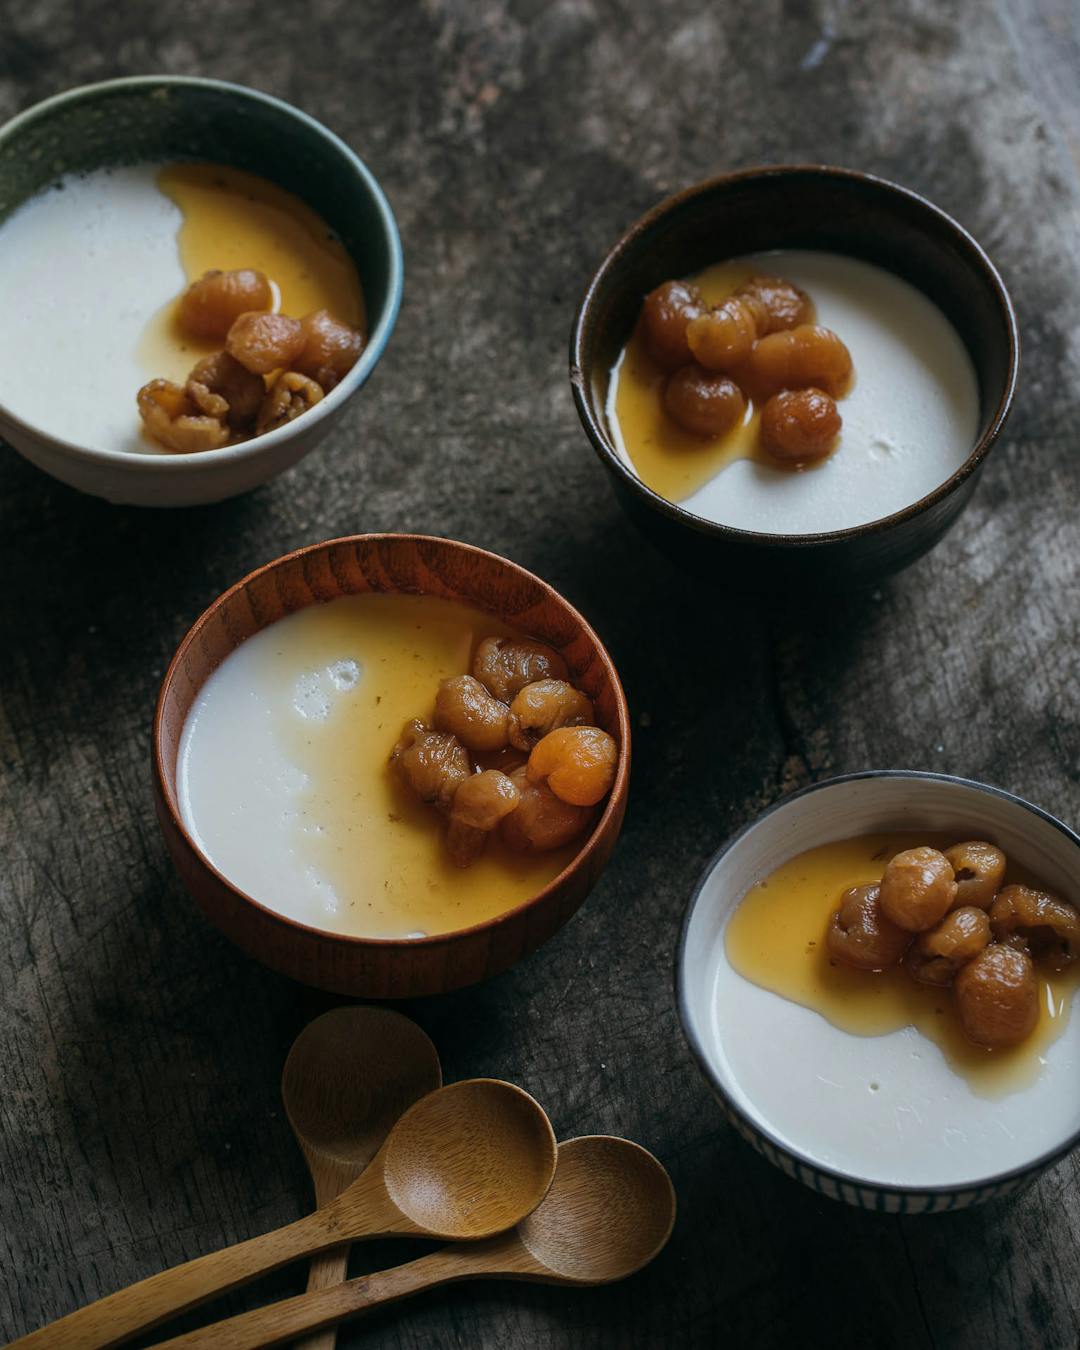 Apricot kernel pudding (Almond pudding) with stewed longans